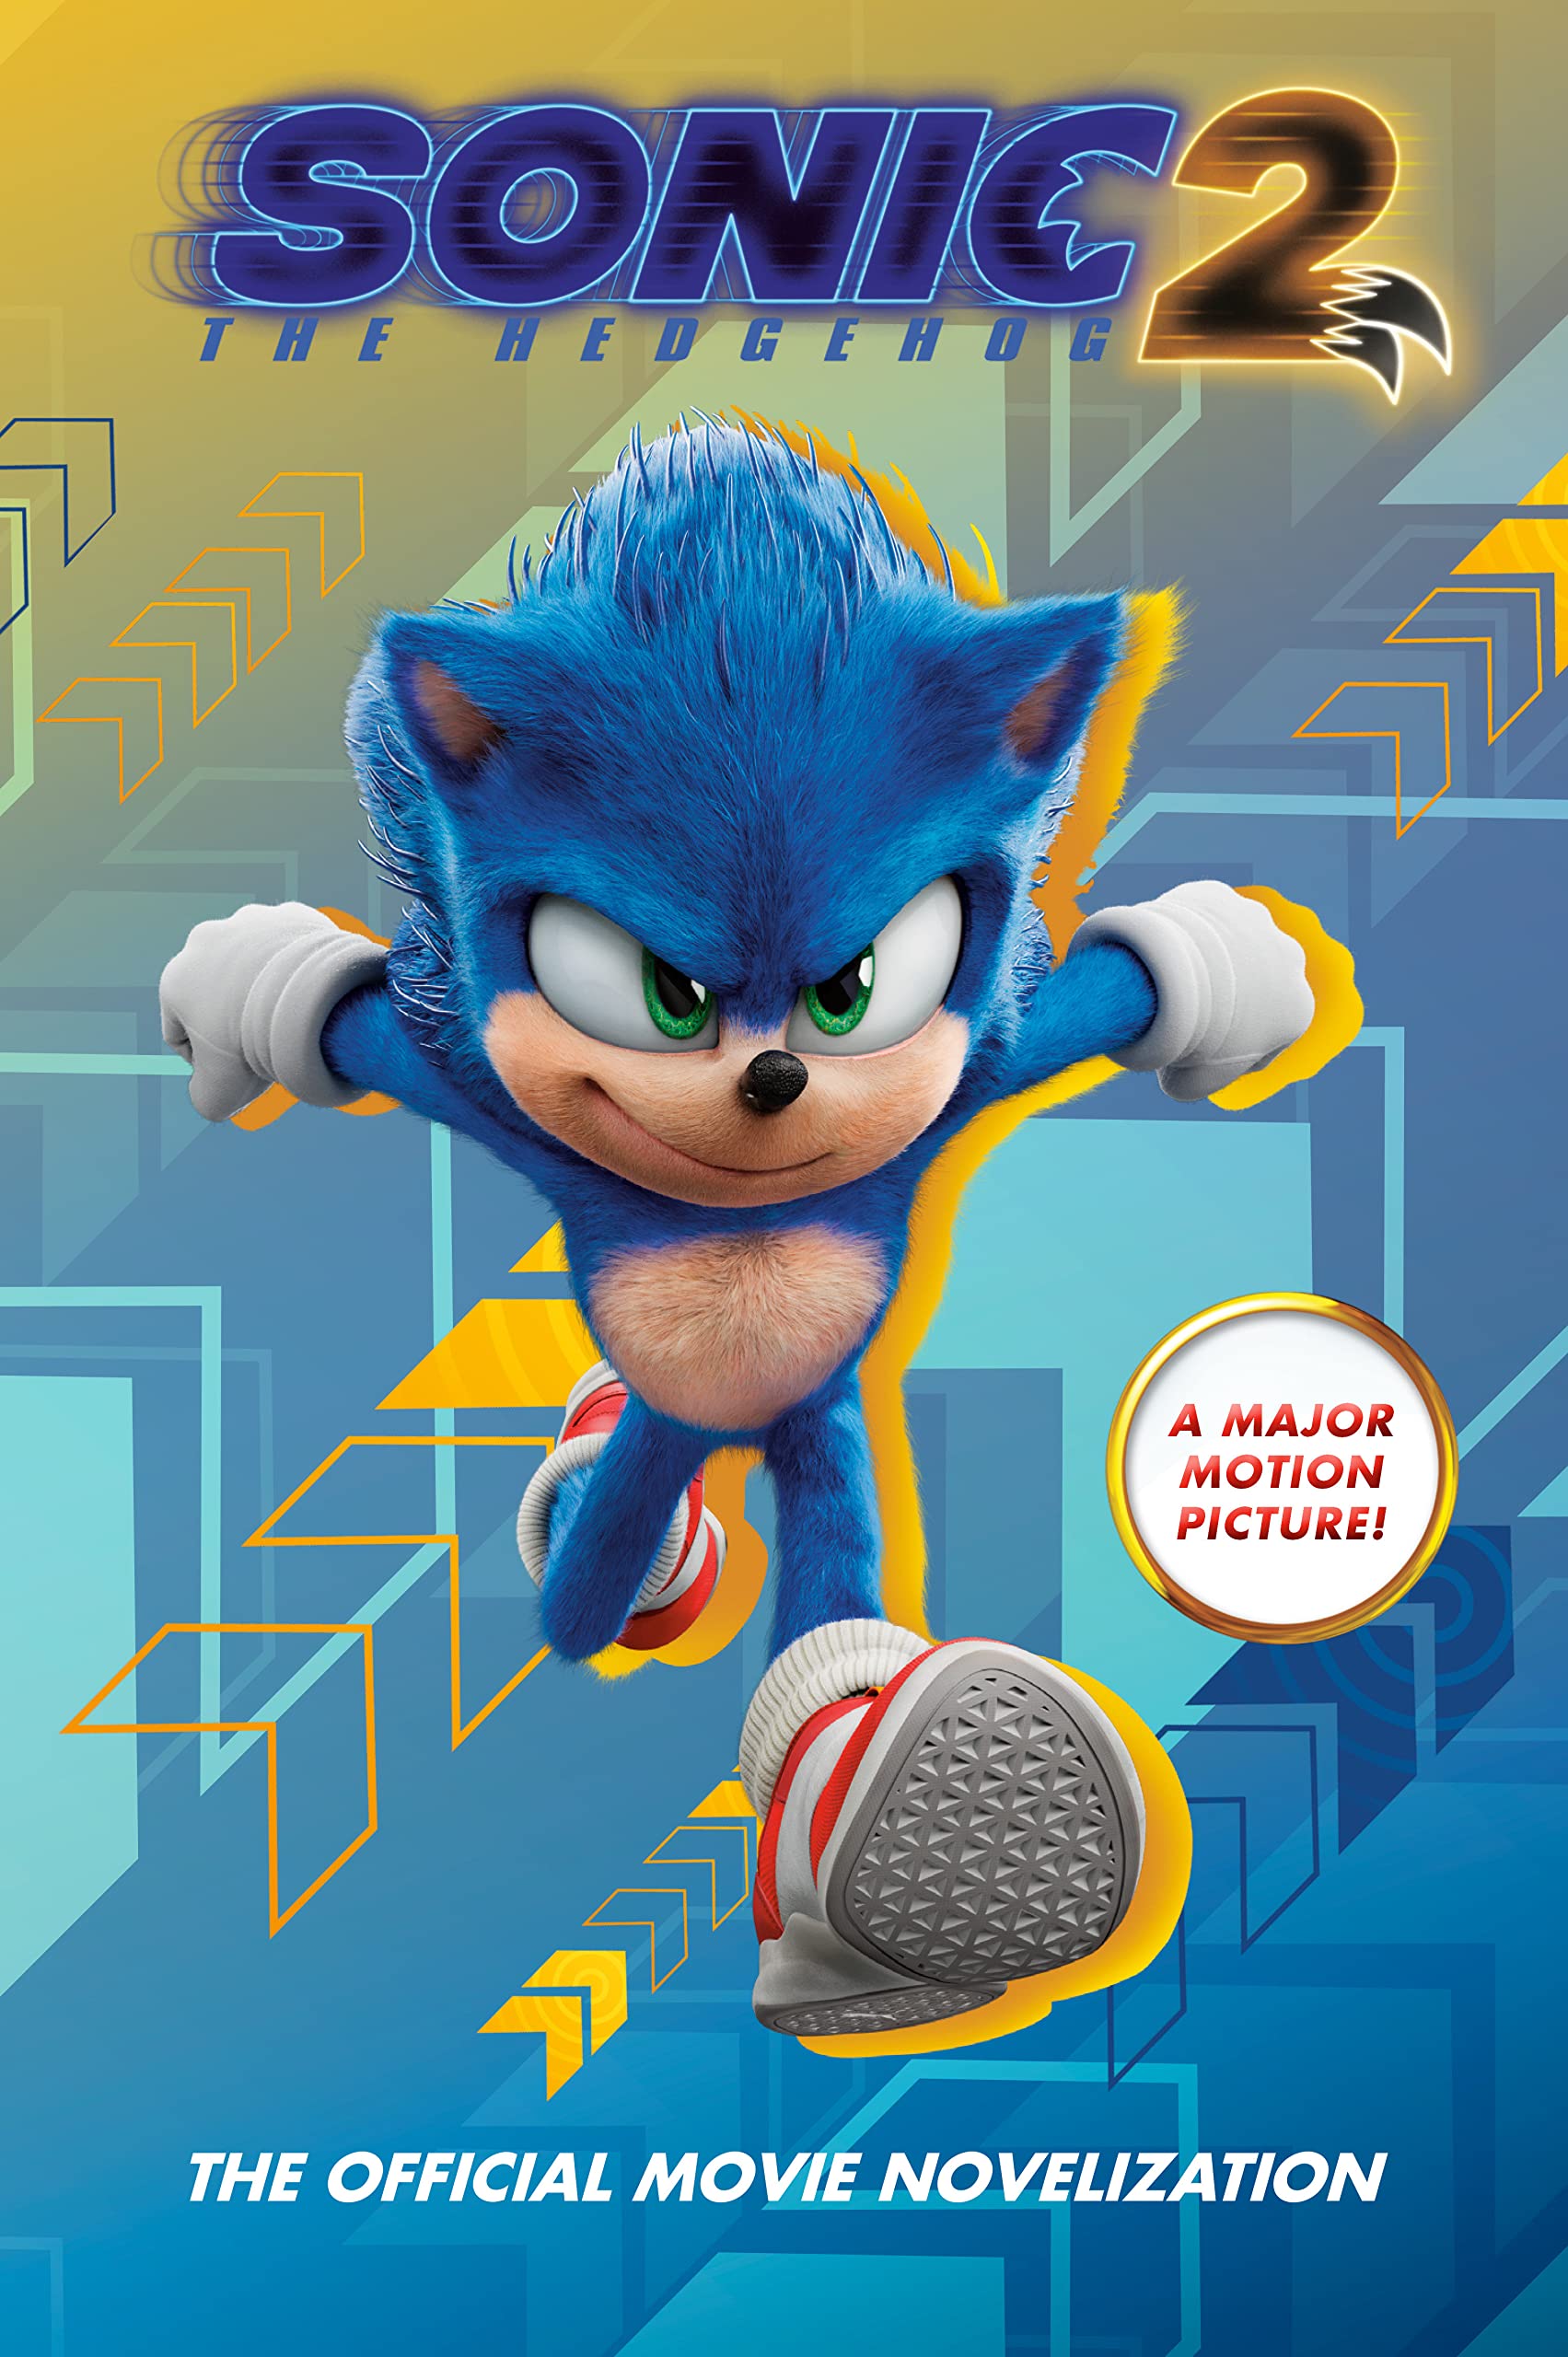 Sonic the Hedgehog, Sonic the Hedgehog Cinematic Universe Wiki